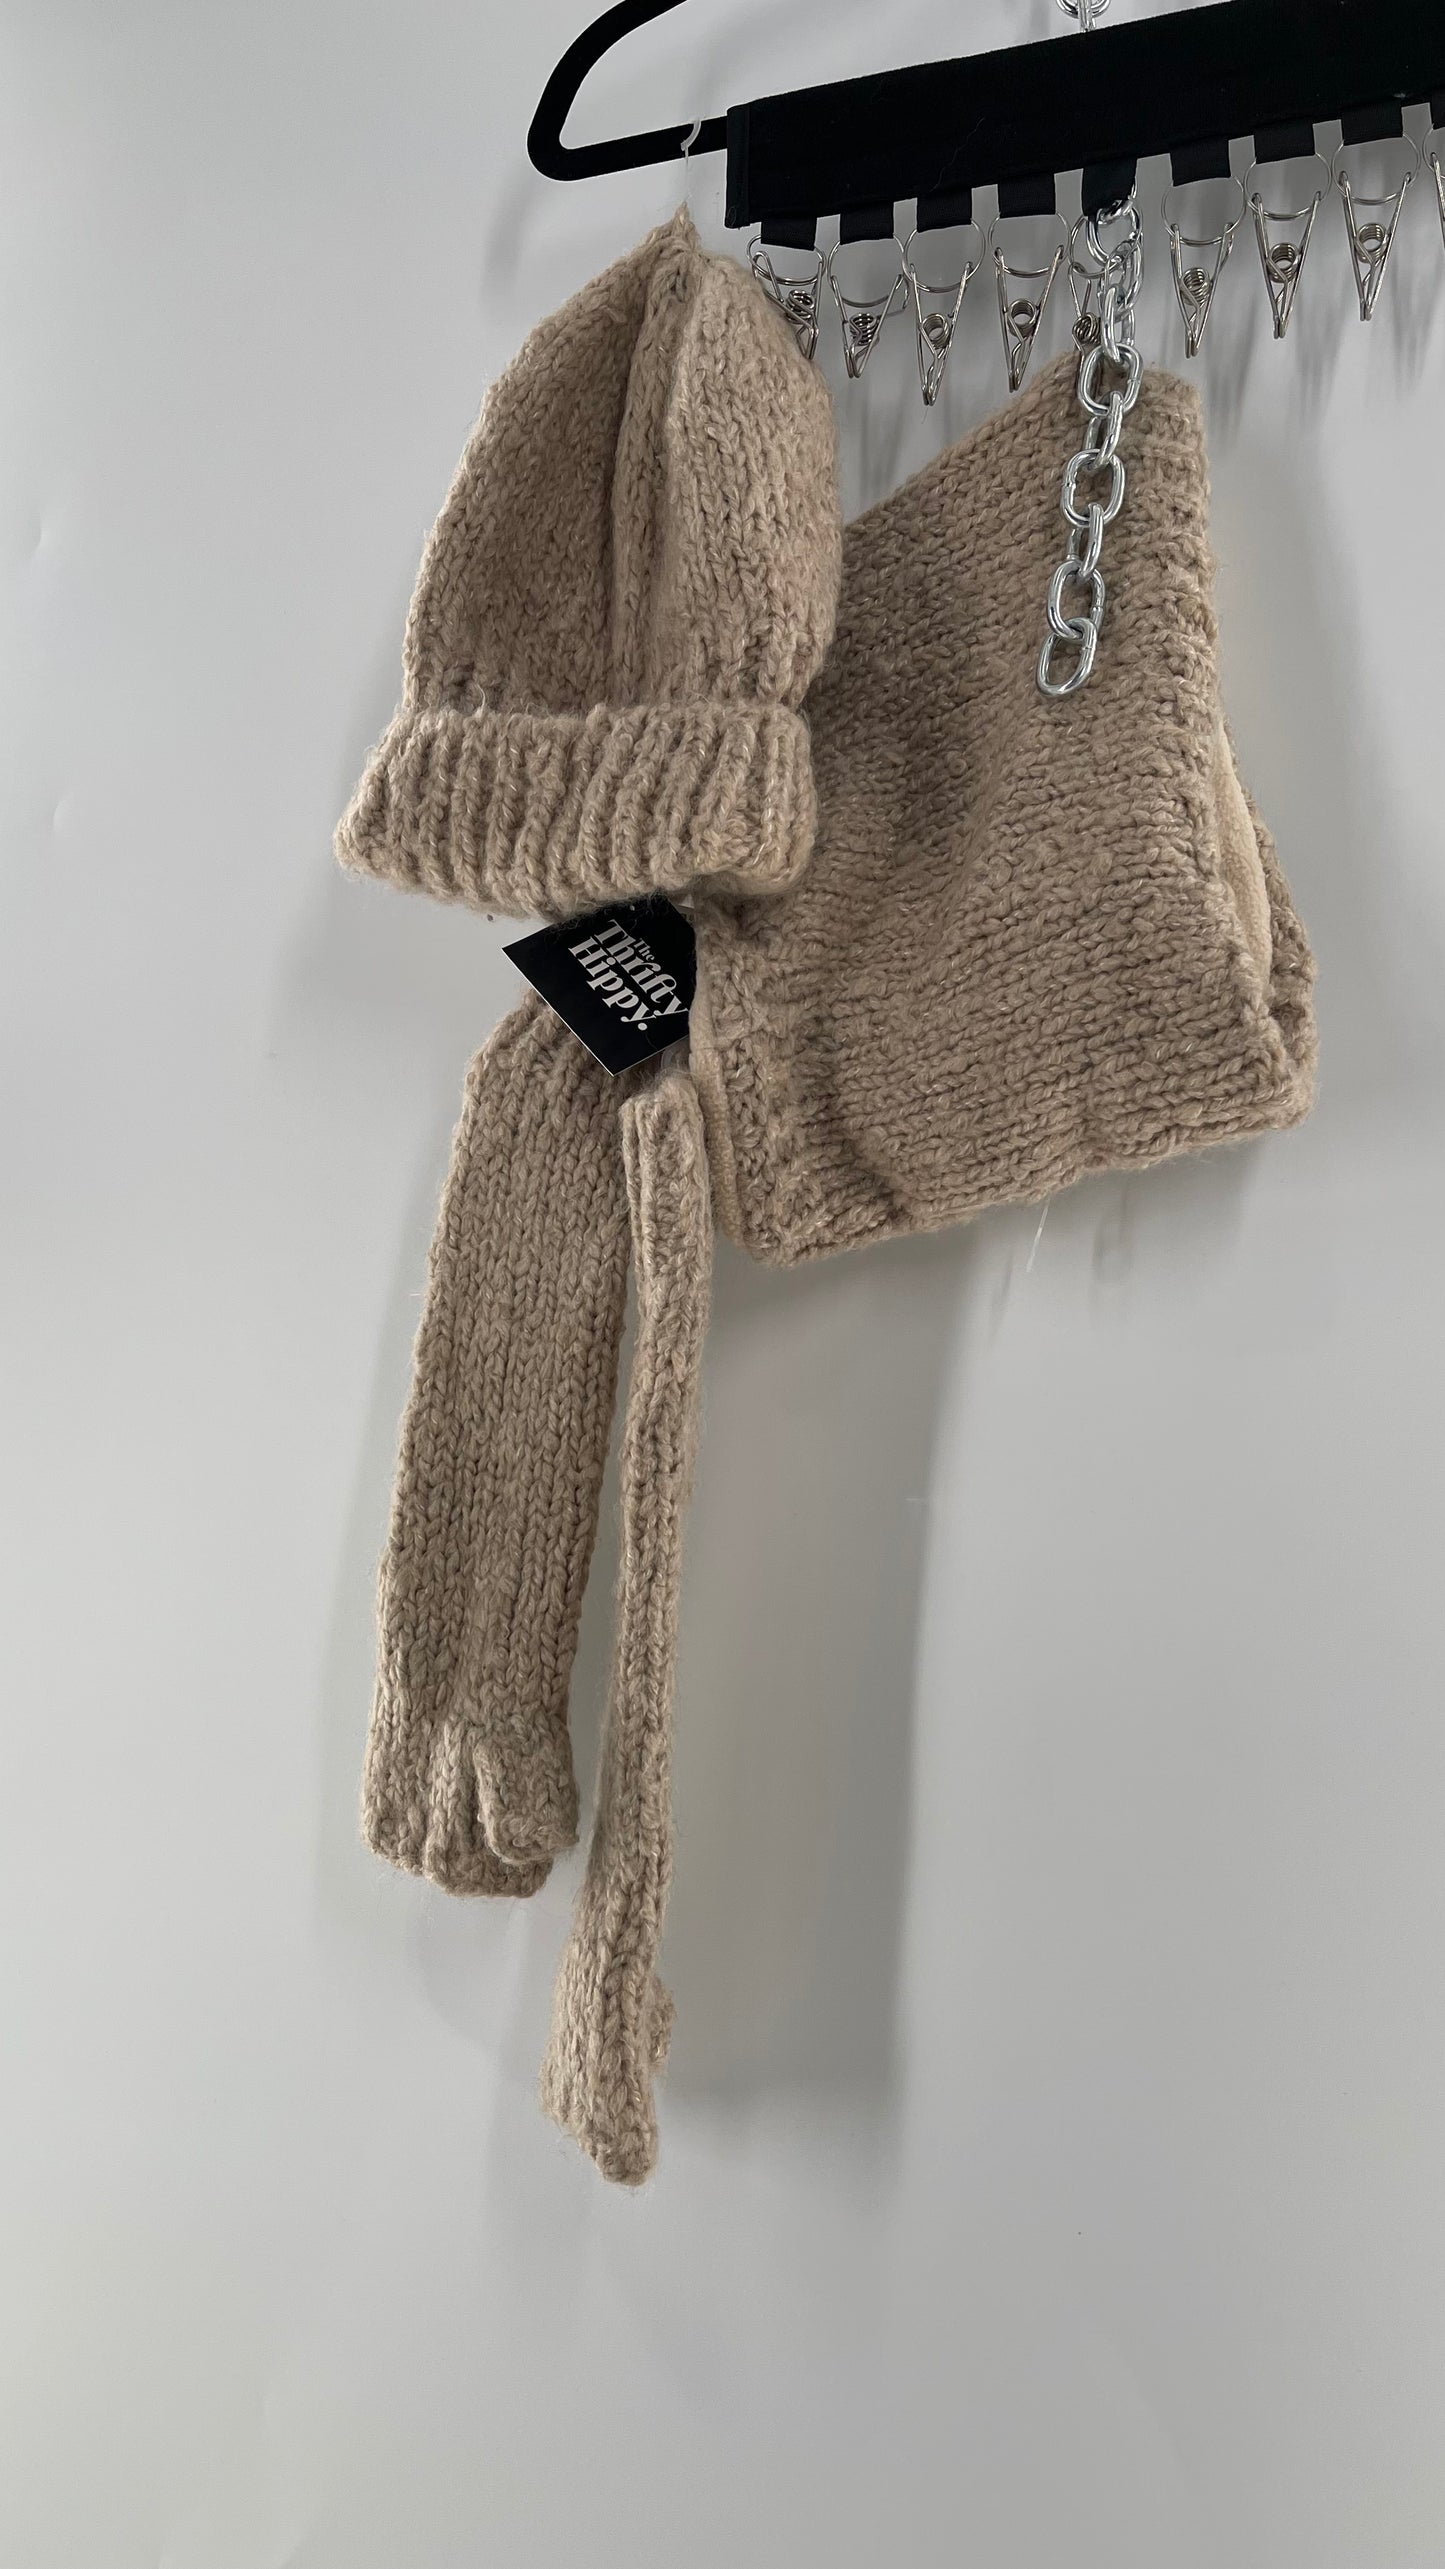 Free People Beige/Tan Knit Gloves, Hat and Scarf Set